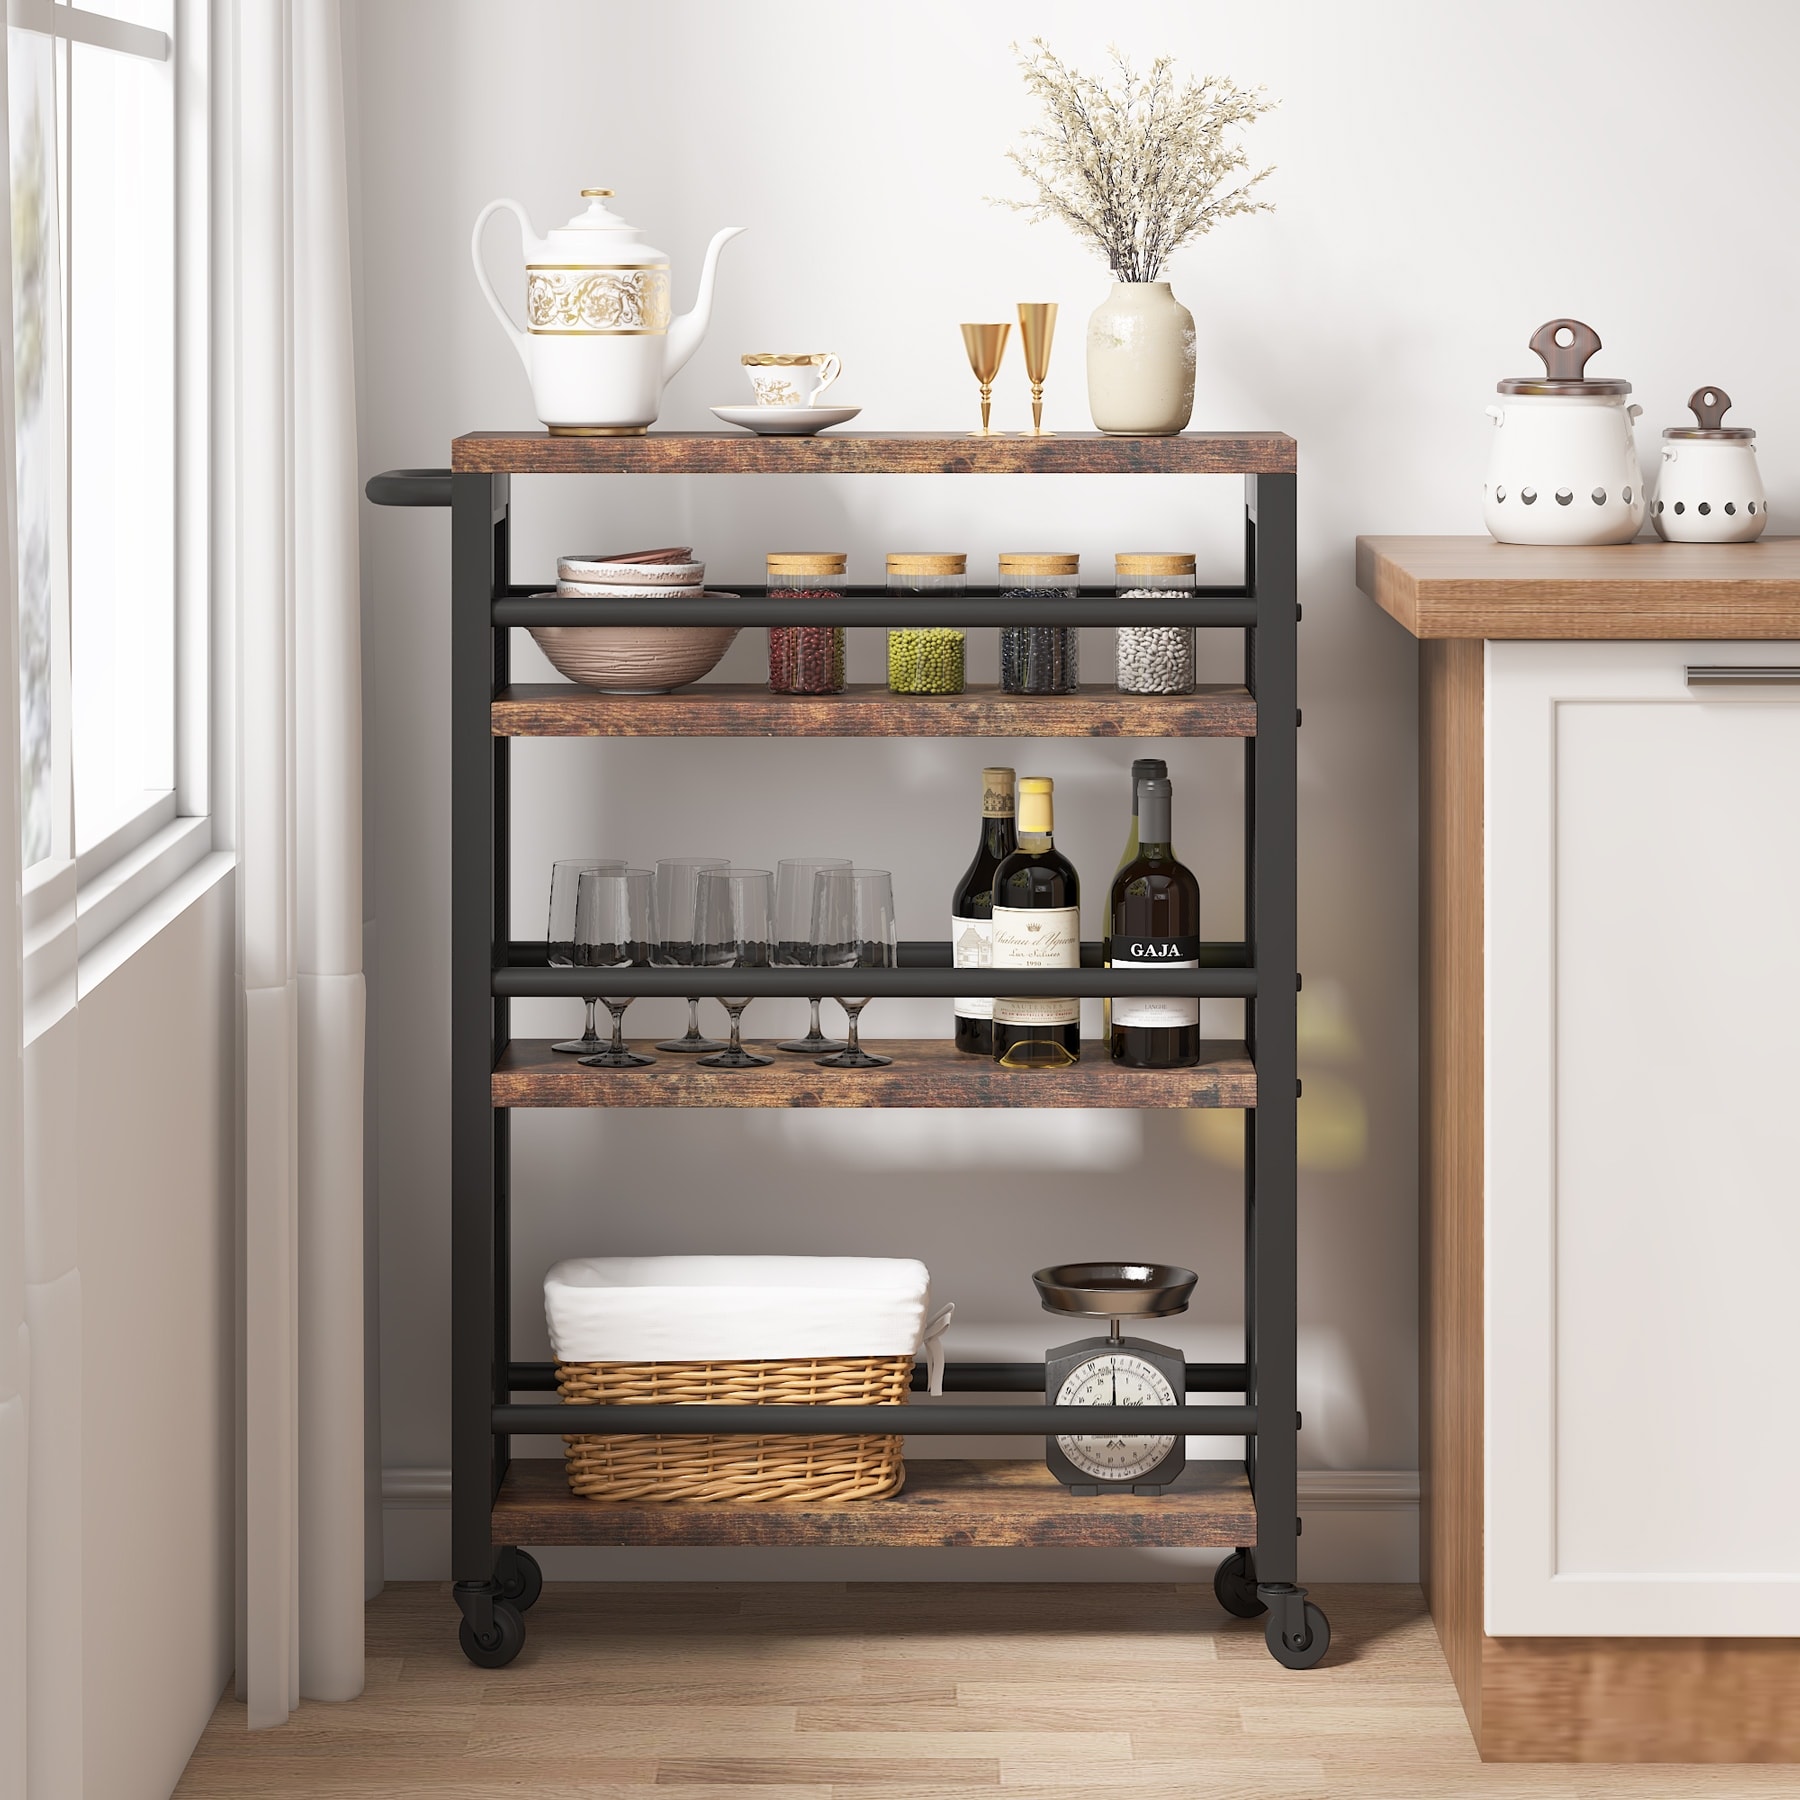 https://ak1.ostkcdn.com/images/products/is/images/direct/c9329d2a8e3d9757ee6c23d44d93c7c88f552ece/Kitchen-Cart%2CSlim-Storage-Rolling-Cart%2C4-Tier-Narrow-Serving-Trolley-with-Wheels.jpg